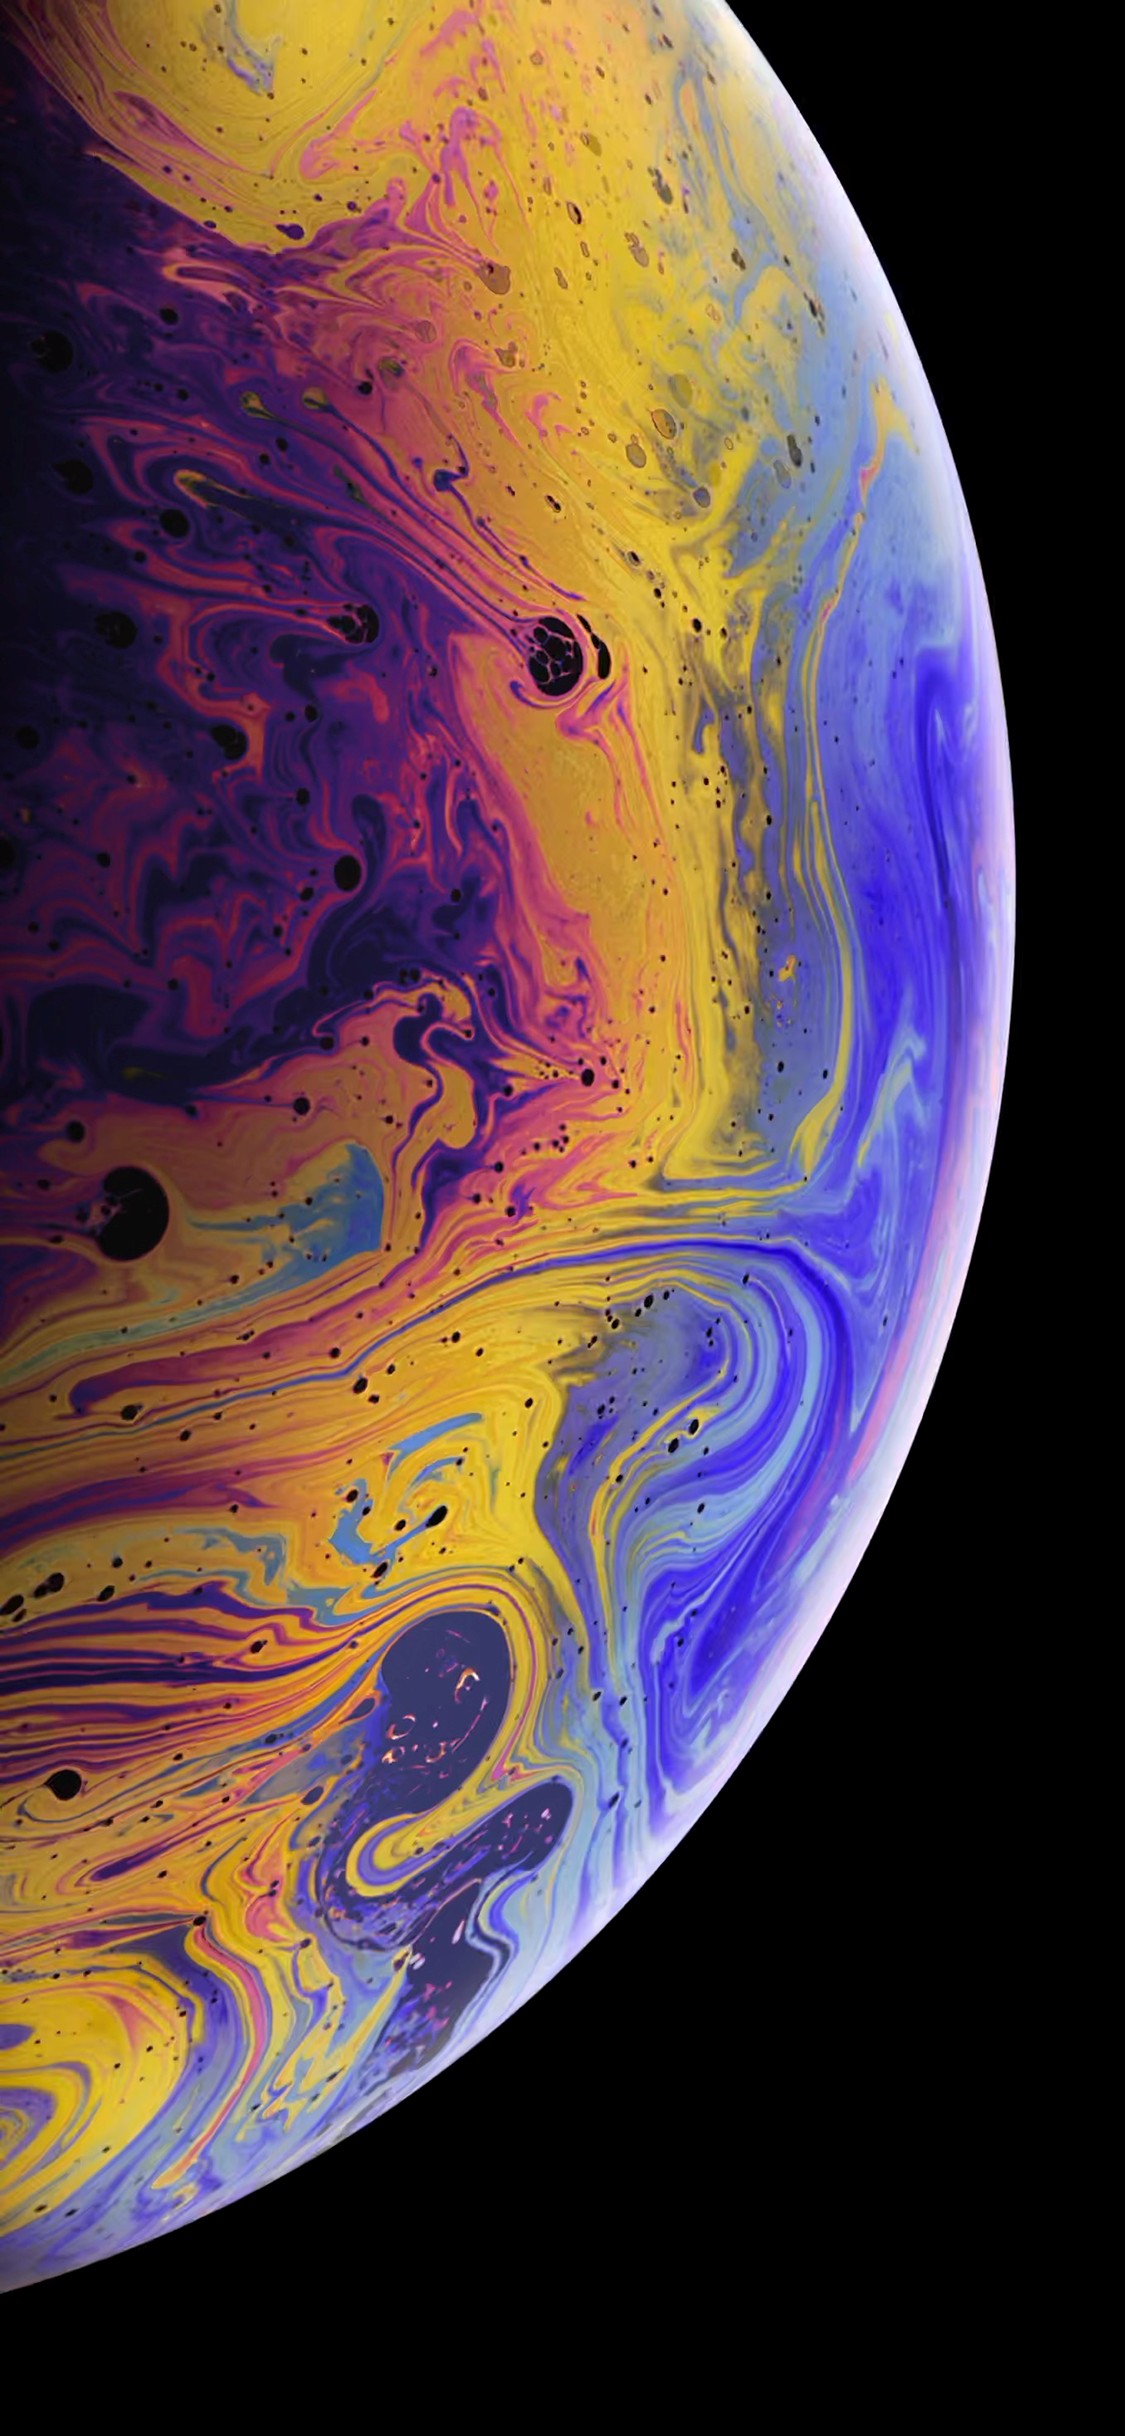 Iphone Xs Screen Lock Wallpaper With High-resolution - Lock Screen Wallpaper Hd - HD Wallpaper 